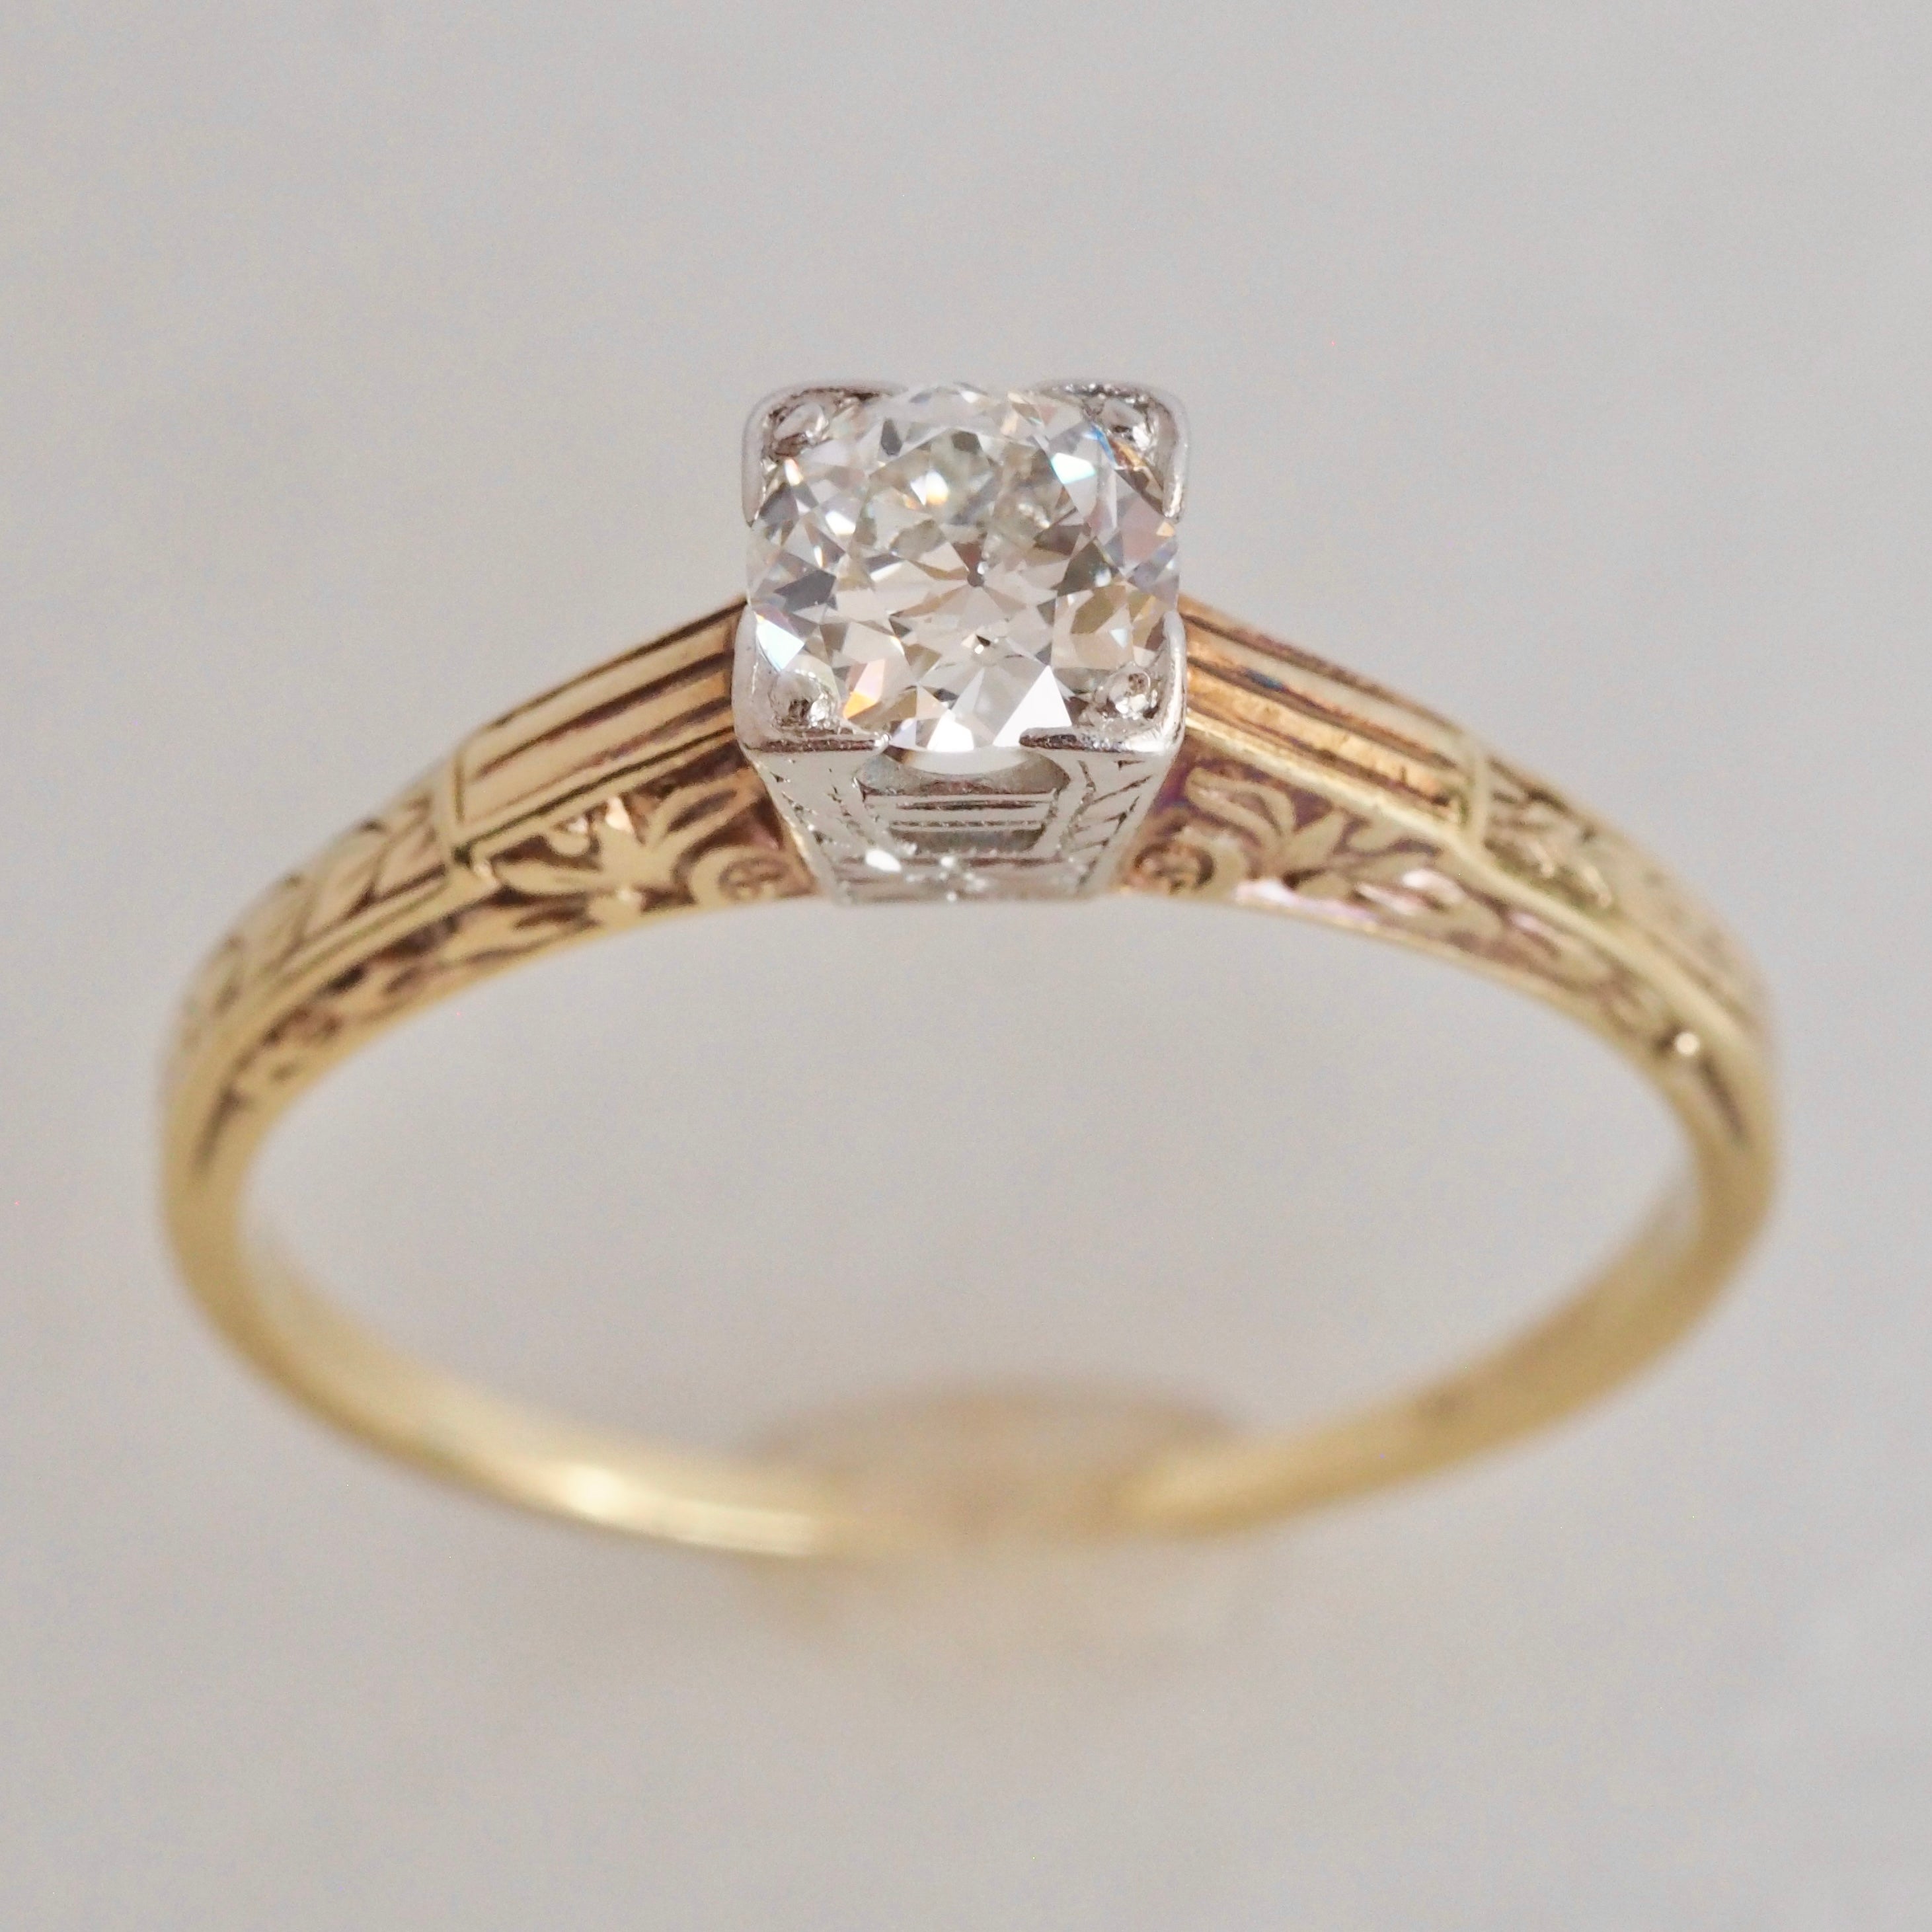 Art Deco 14k White and Yellow Gold Old European Cut Diamond Engagement Ring